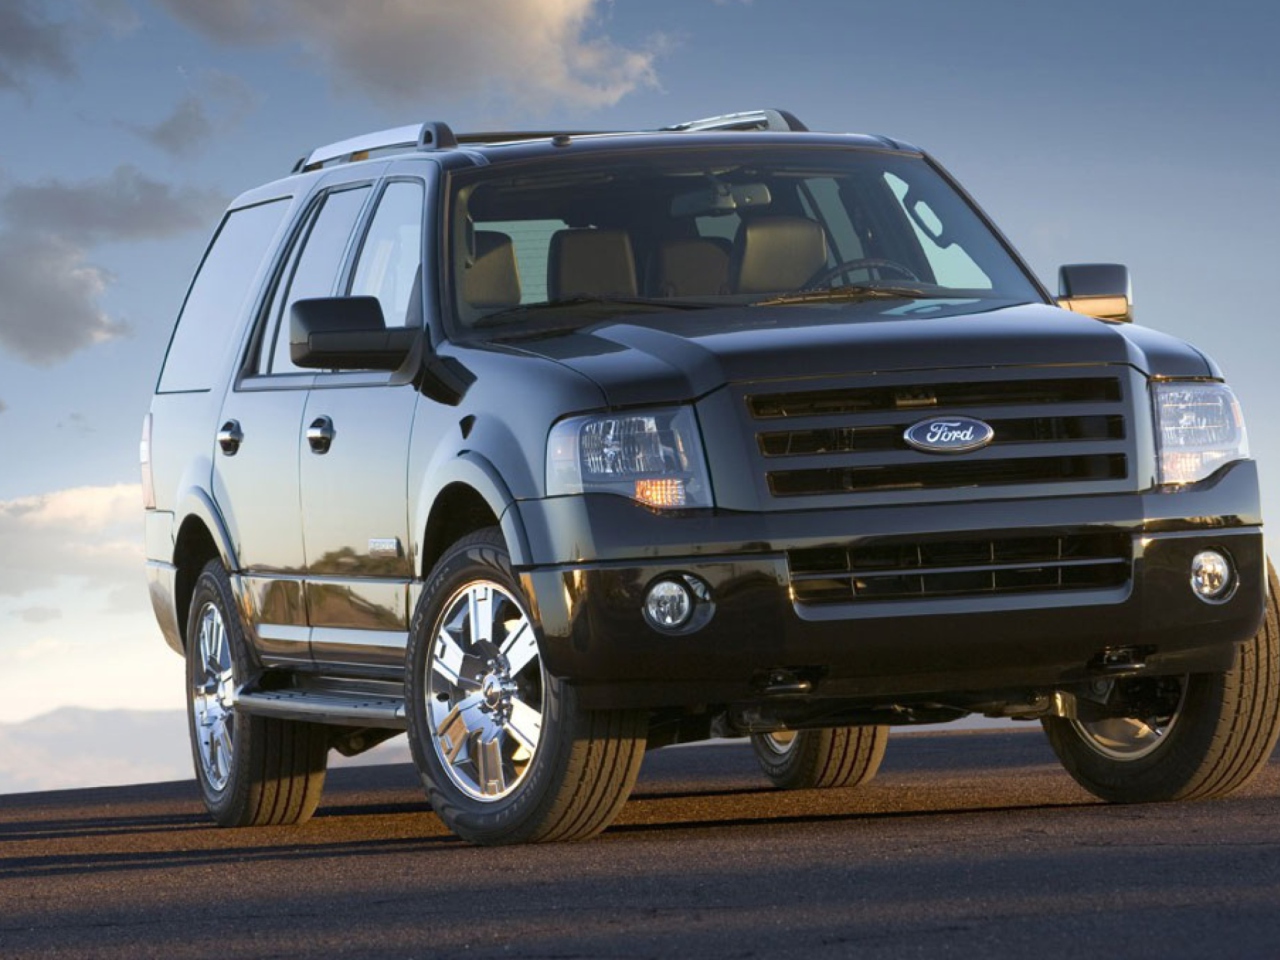 Ford Expedition wallpaper 1280x960